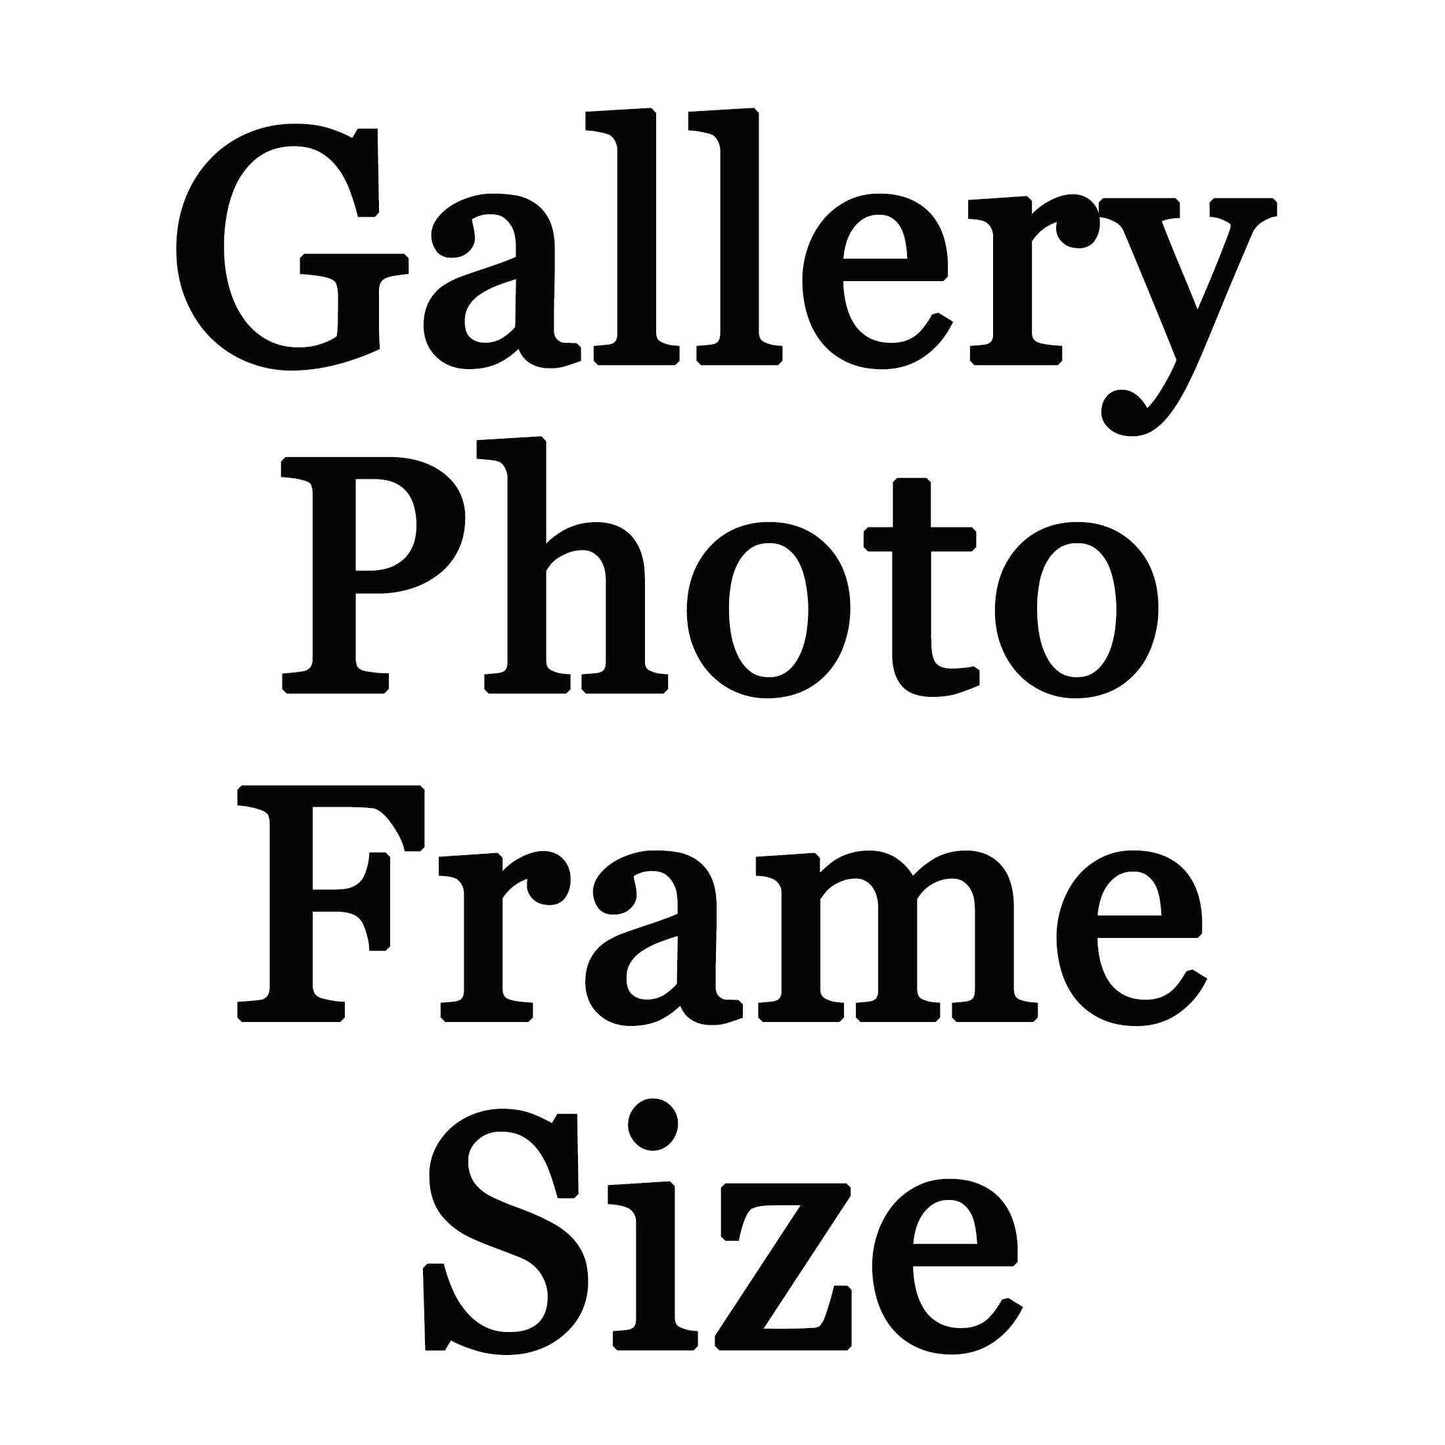 Gallery Photo Frame UPCHARGE for Size 20x30. This Option belongs to the Main Product. DON'T DELETE the Main Product or this Option if you want this Size - FromPicToArt